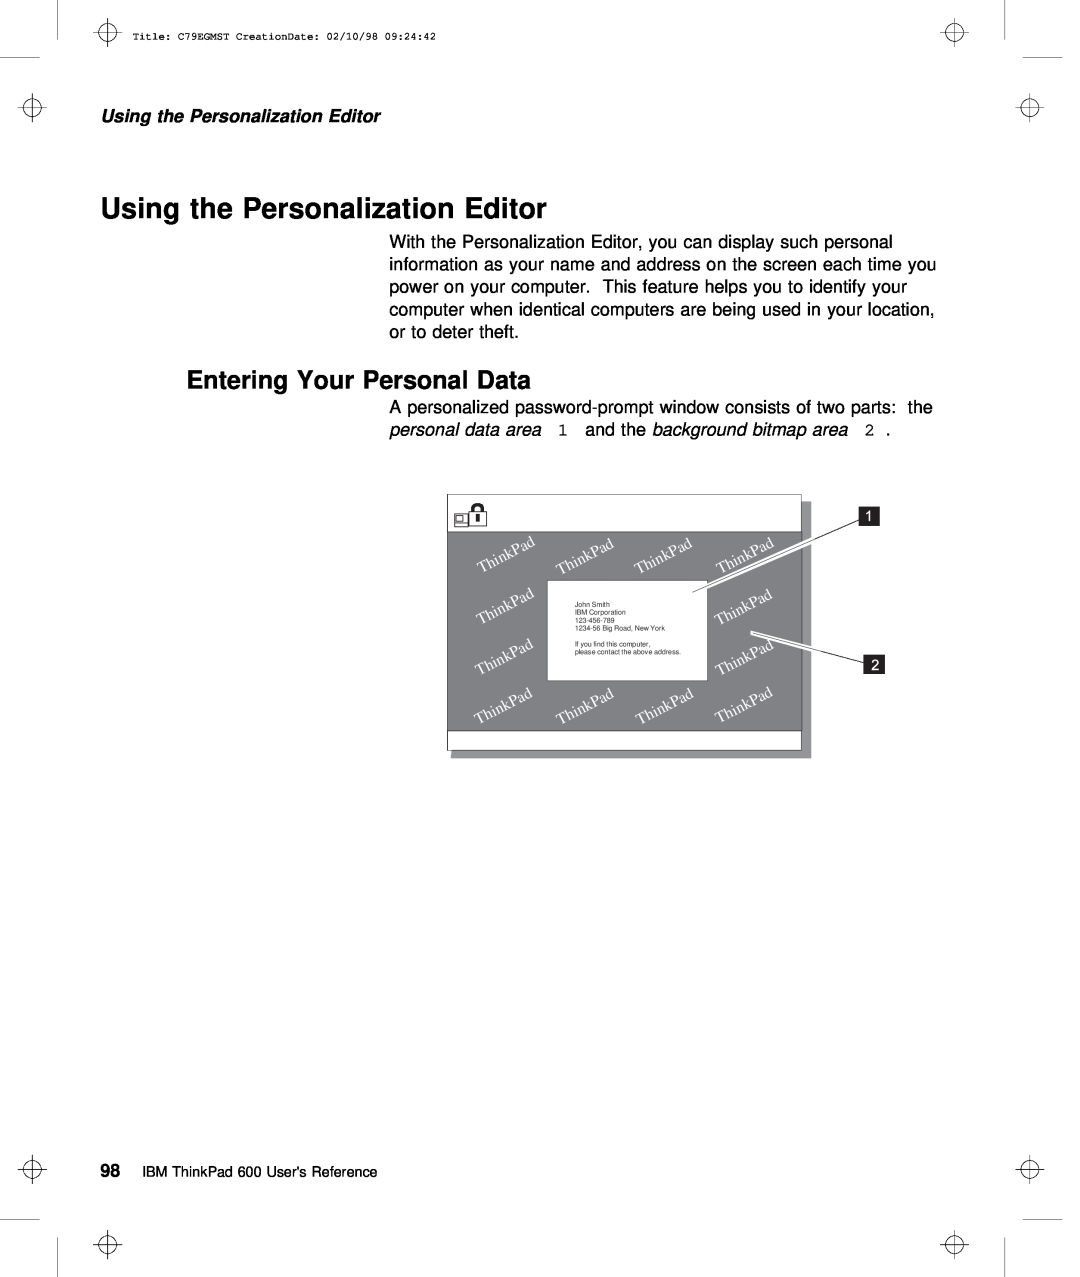 IBM C79EGMST manual Using the Personalization Editor, Entering Your Personal Data 